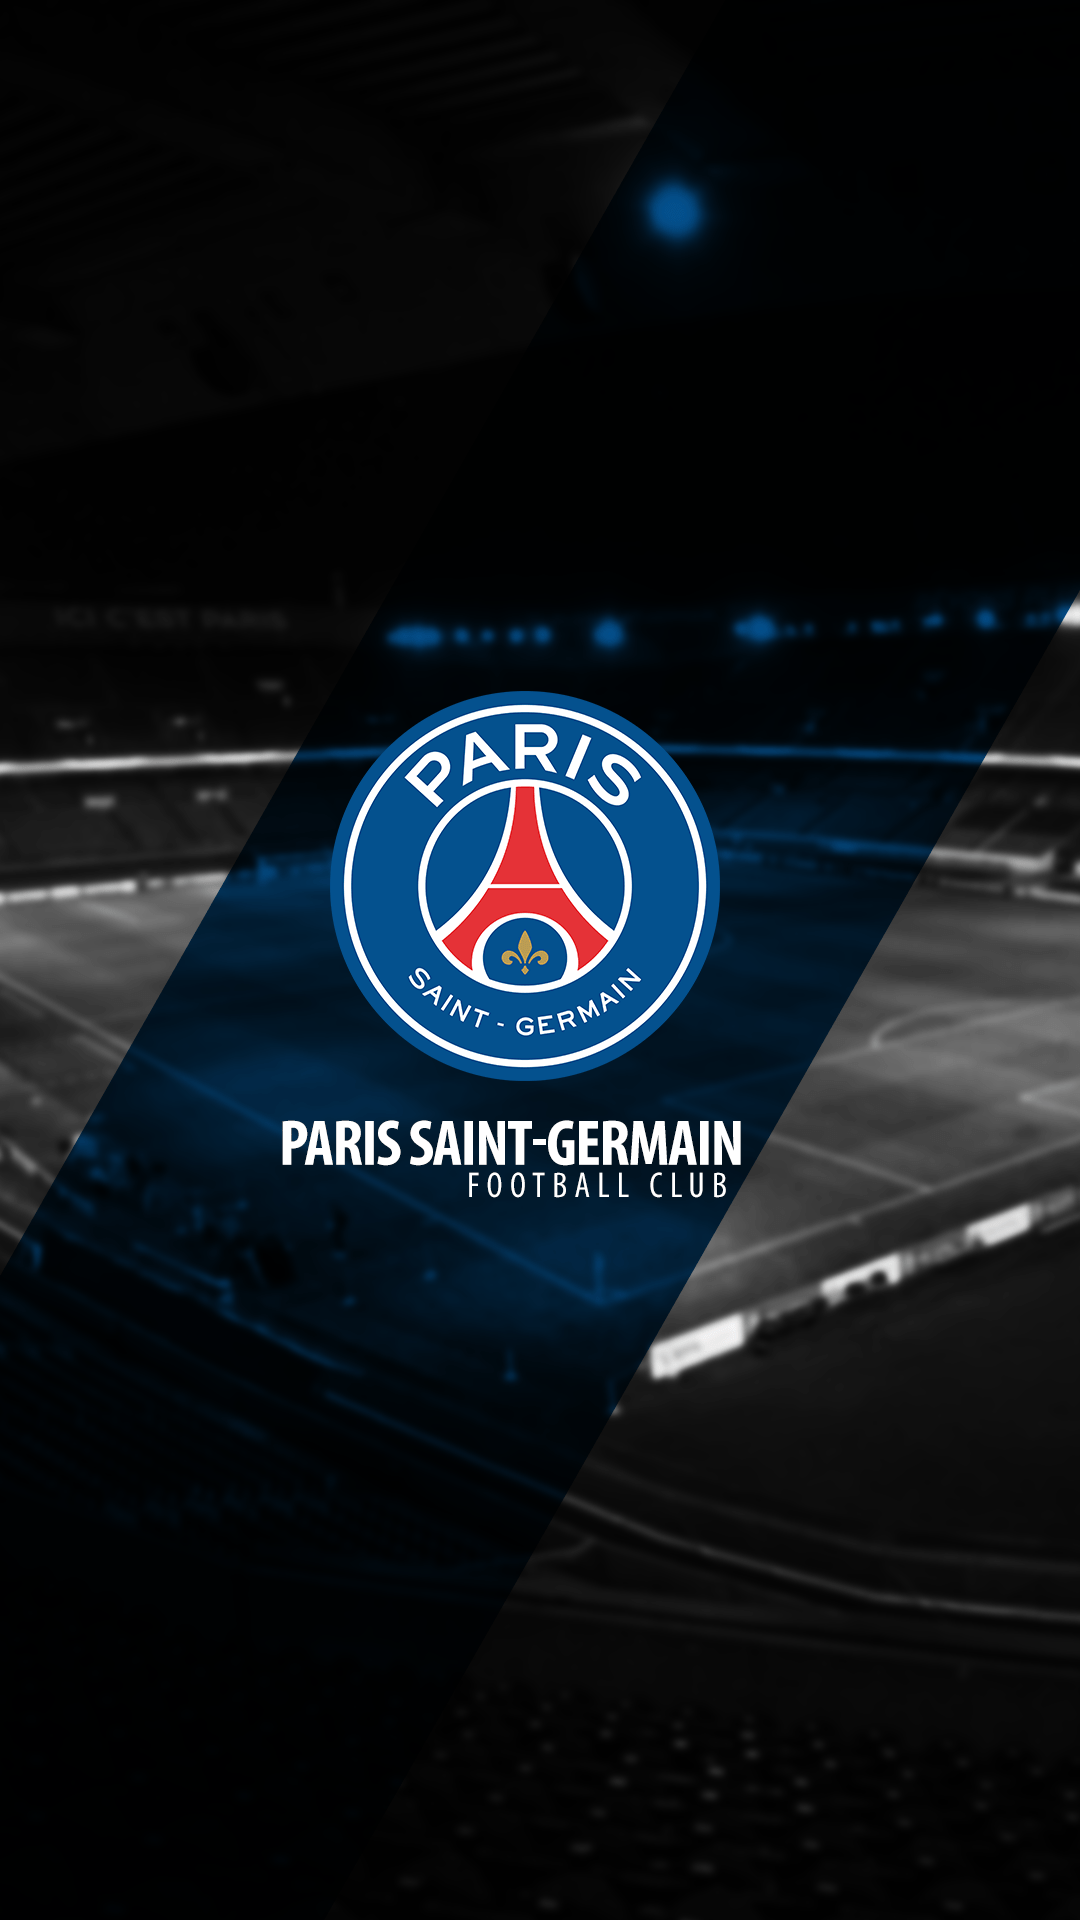 Paris Saint Germain football club logo one of the French league 1 teams  in front of a red background 2K wallpaper download